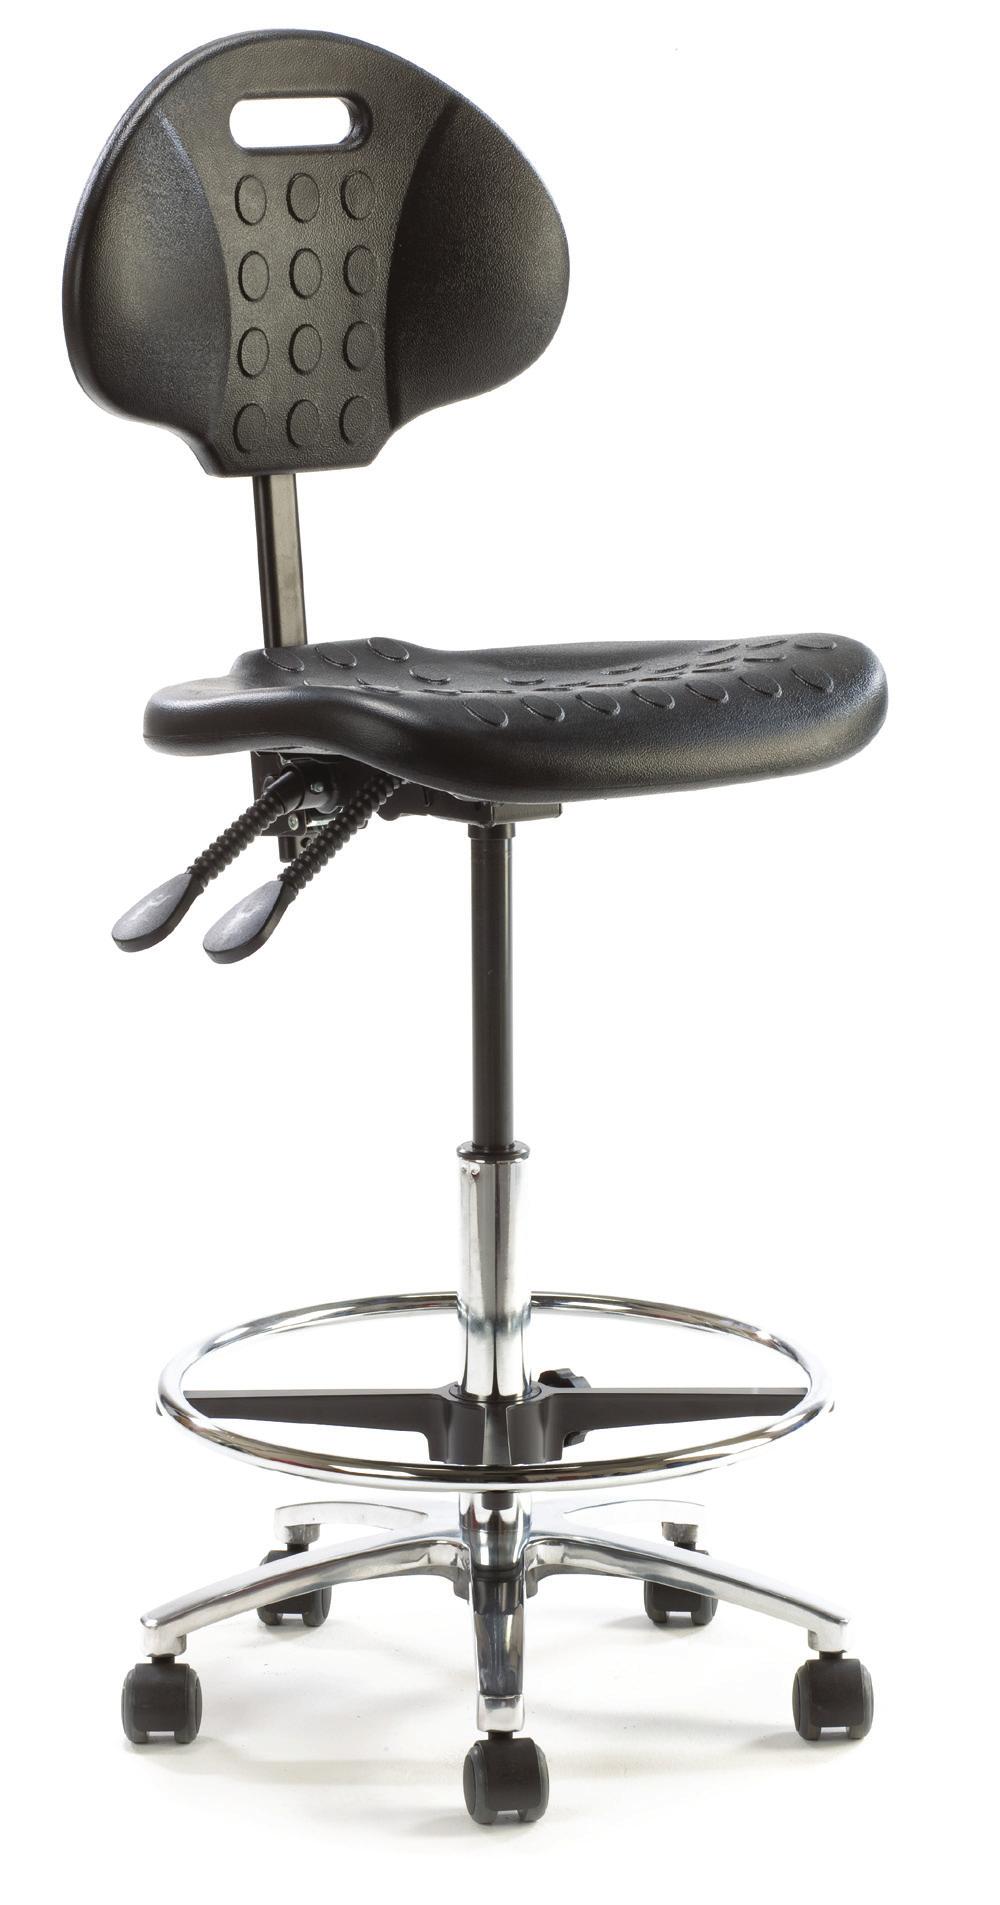 All chairs and stools are height adjustable and can be fitted with optional foot height control and a wide choice of castors.